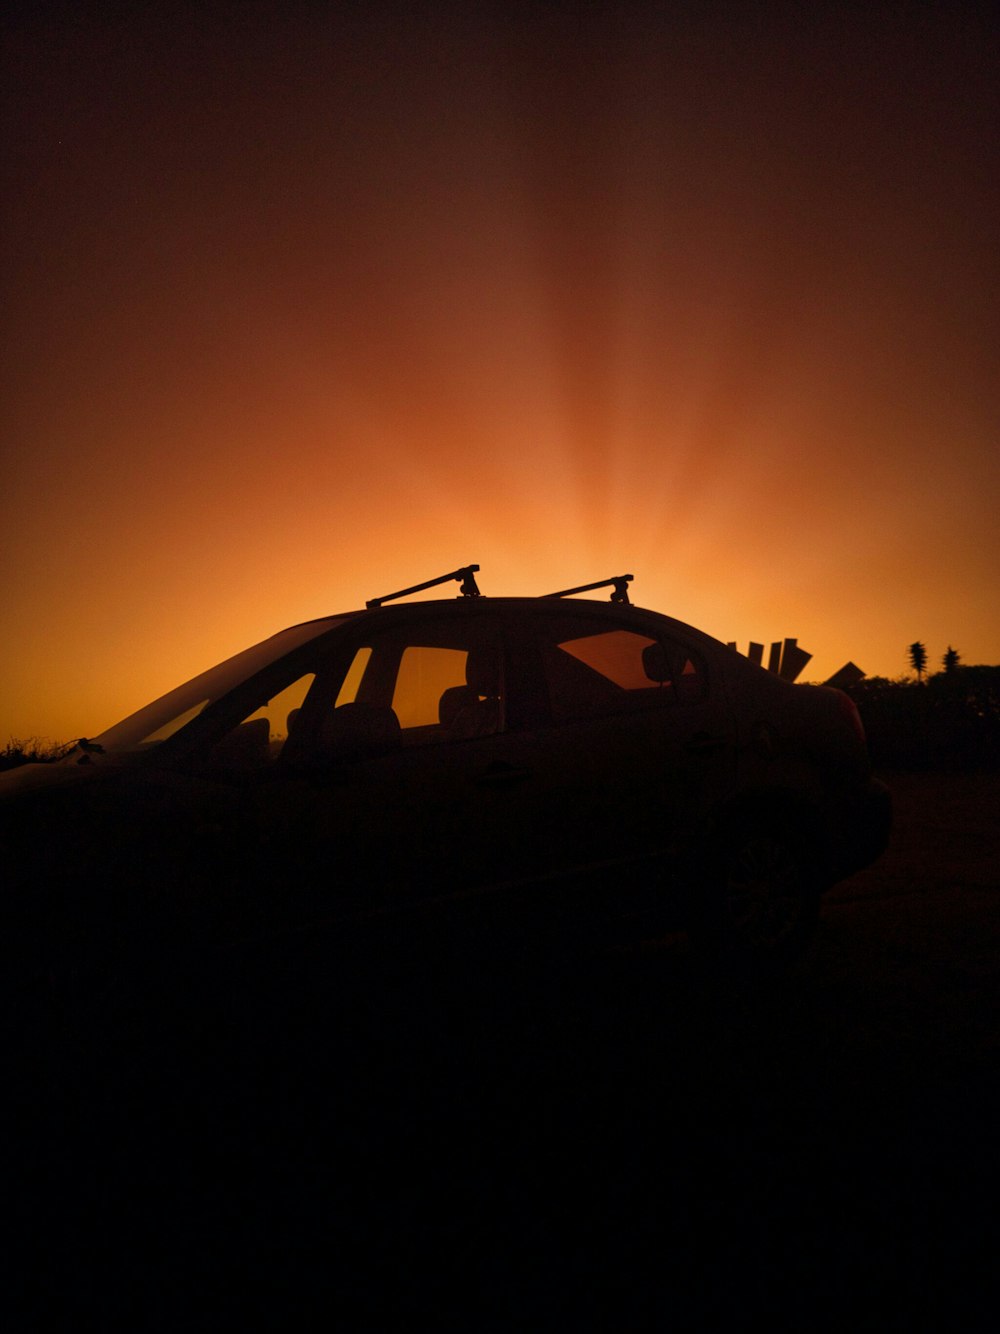 the sun is setting behind a car in the dark